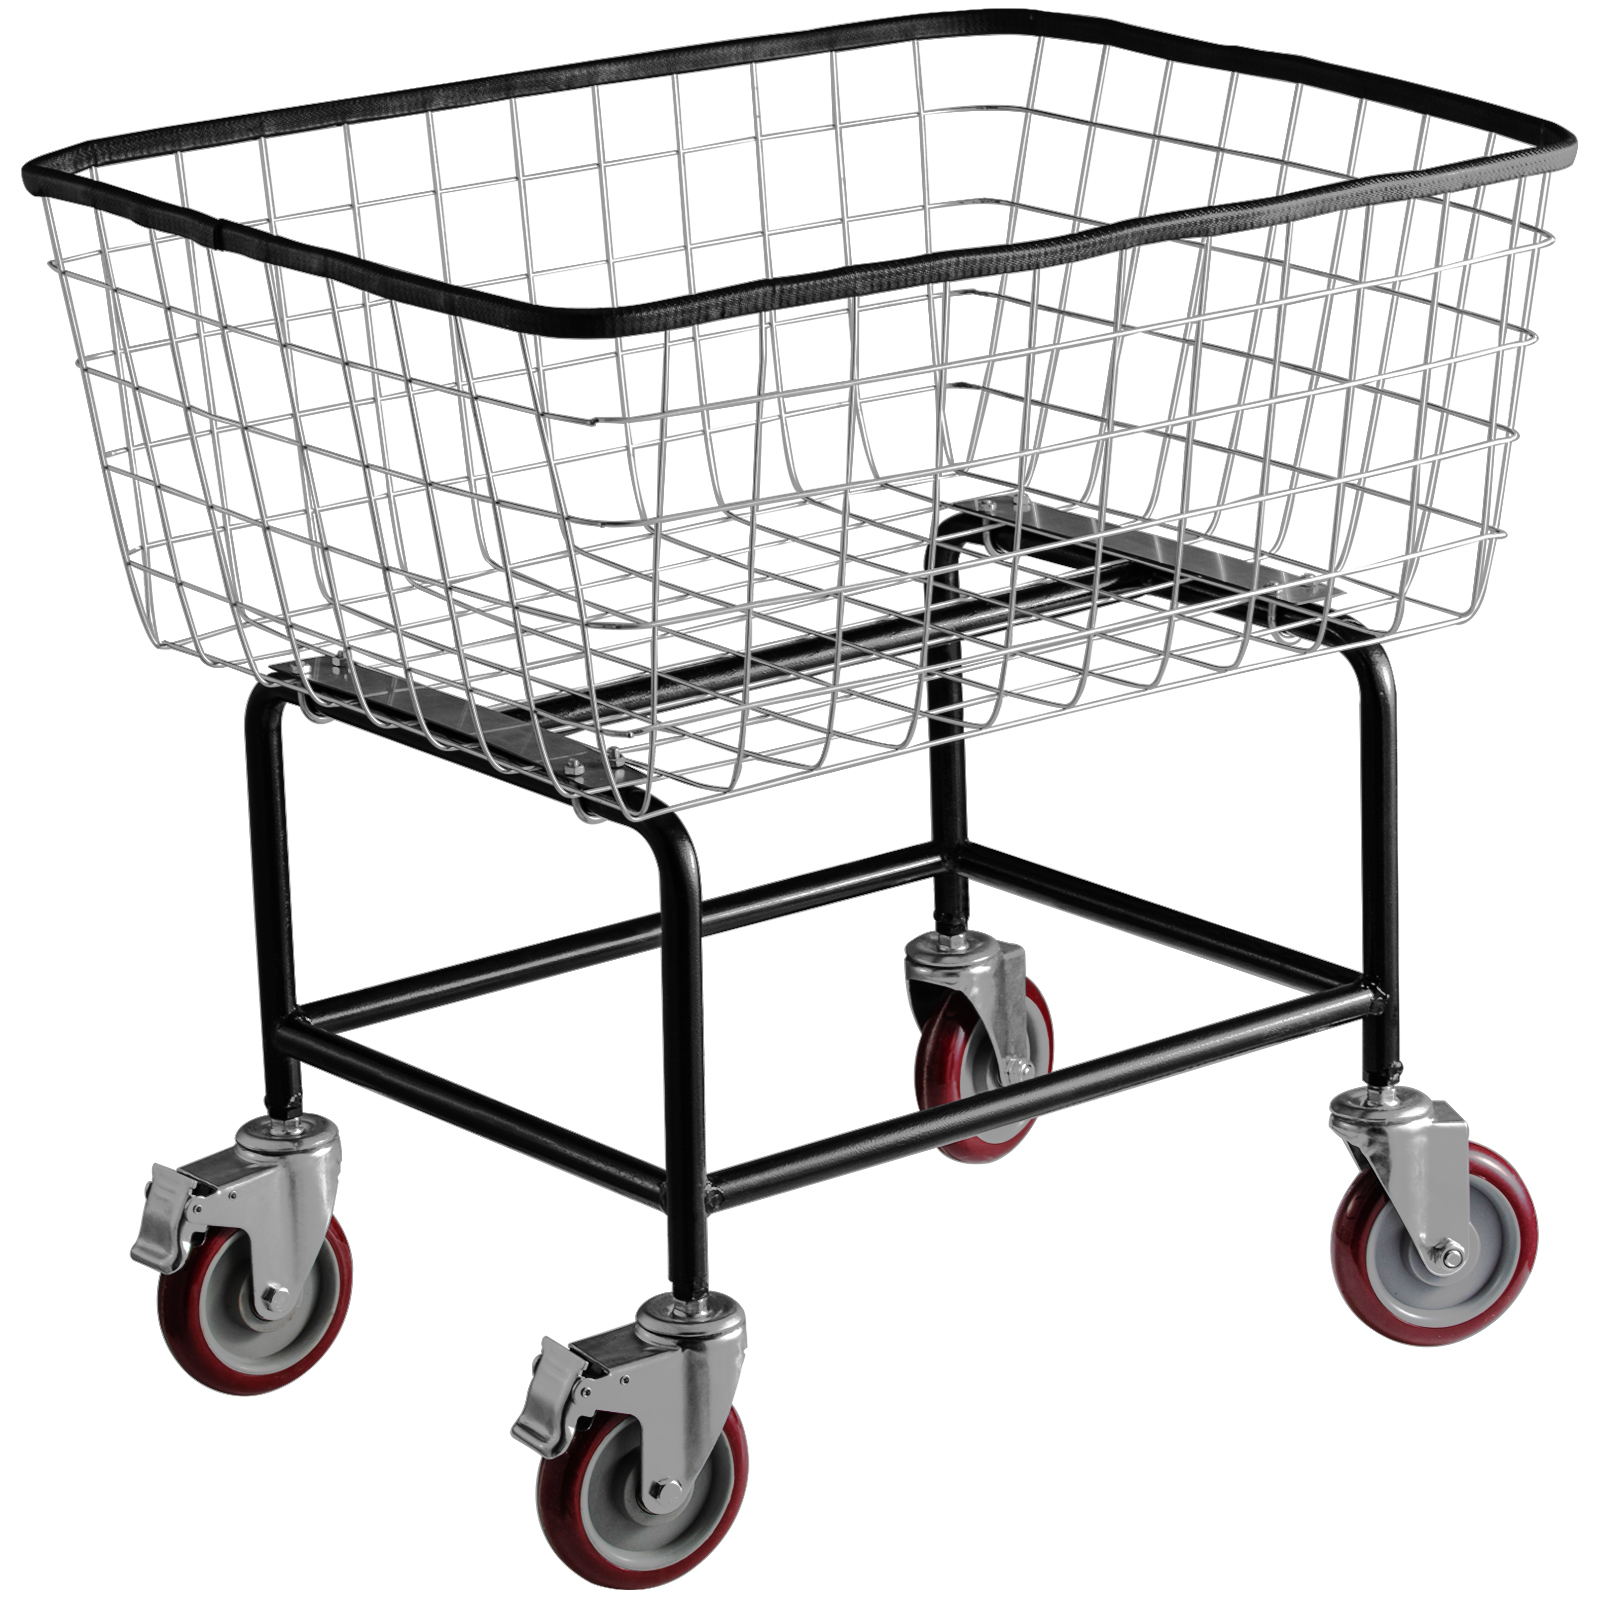 VEVORbrand Steel Rolling Laundry Cart 2.2 Bushel, Wire Laundry Basket with Wheels, Steel Frame with Galvanized Finish, 5" Casters, Wire Cart for Laundry - image 1 of 9